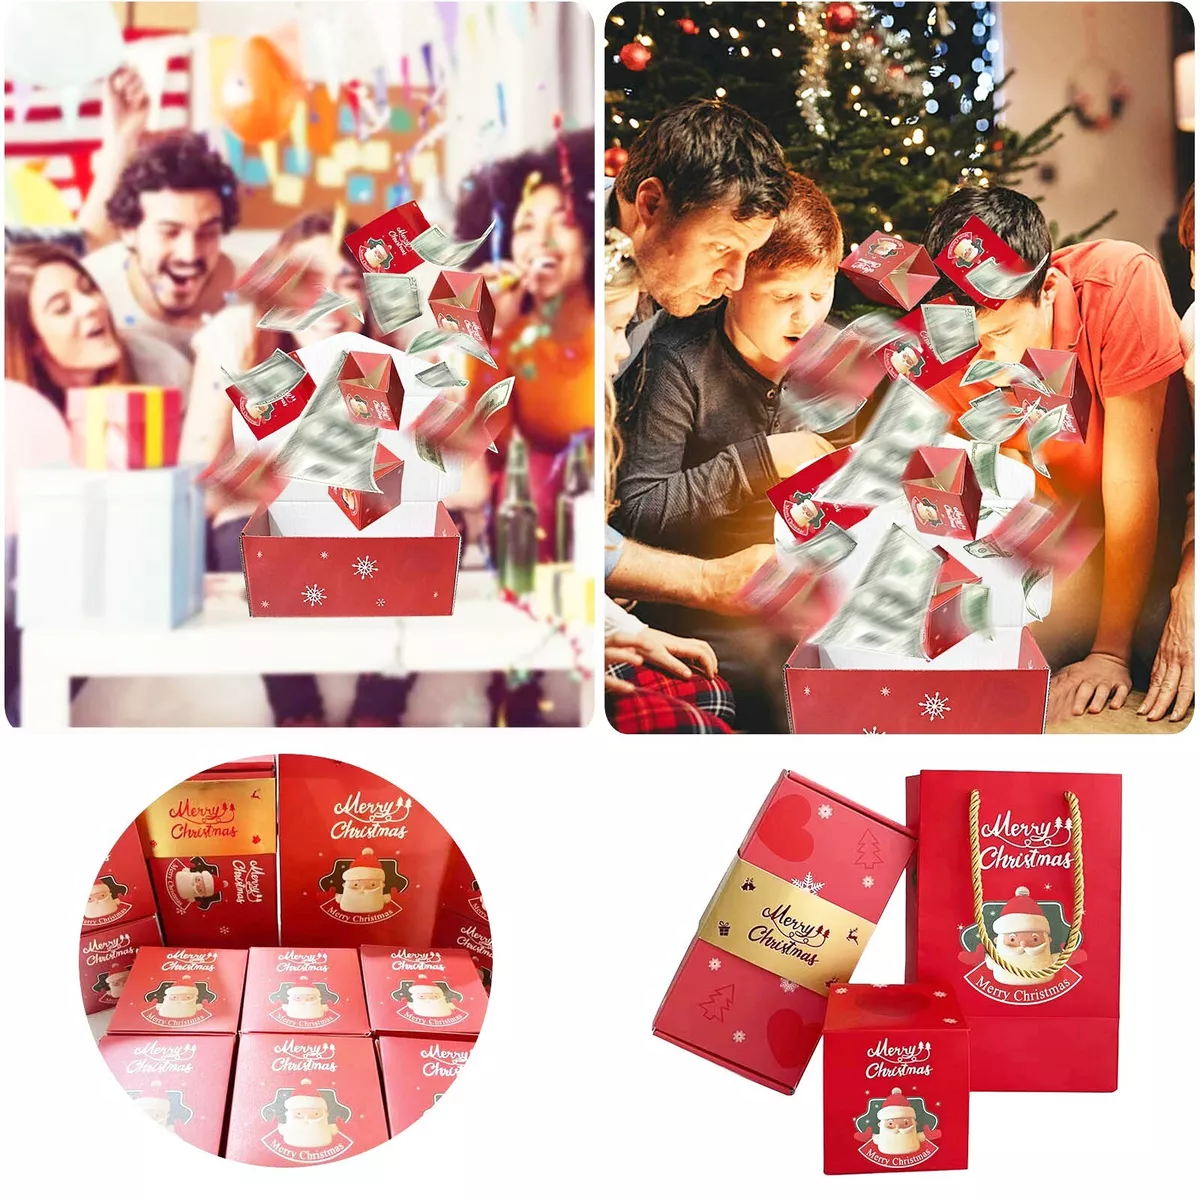 Merry Christmas Surprise Gift Box Surprise Gift Box Explosion For